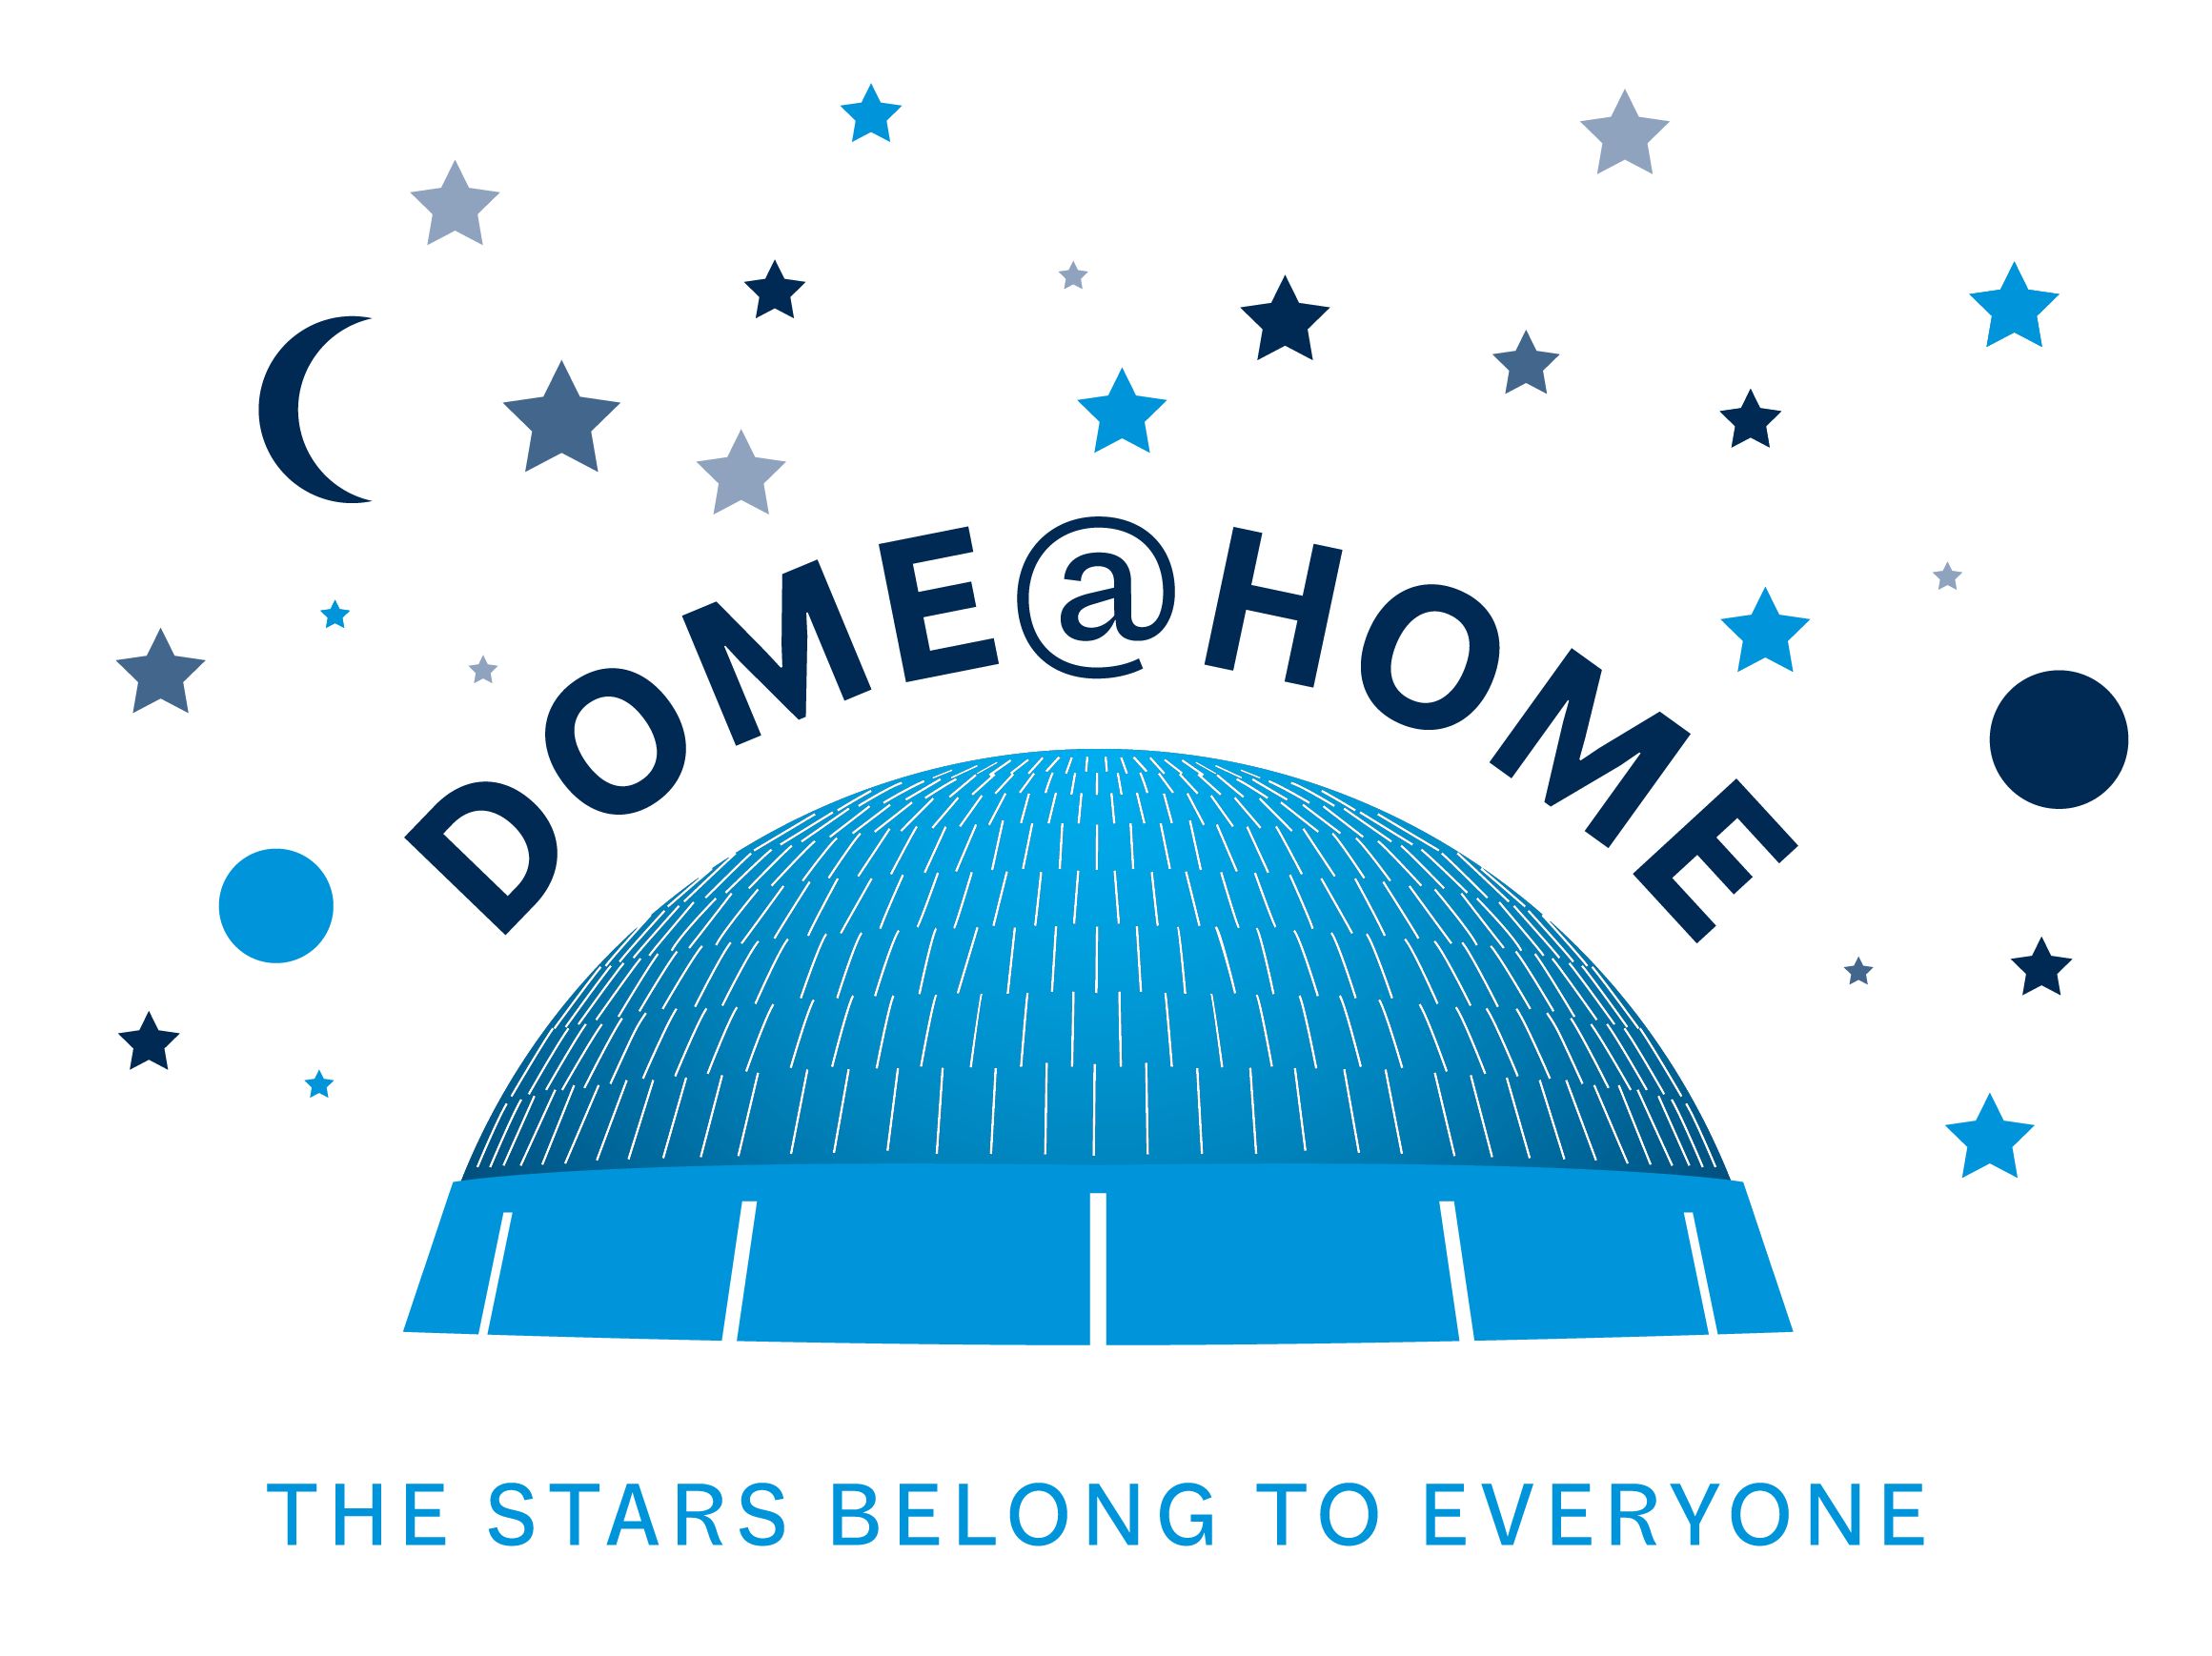 Dome@Home logo featuring the exterior of the Planetarium dome surrounded by small stars and the moon. Text reads, "Dome@Home / The stars belong to everyone".